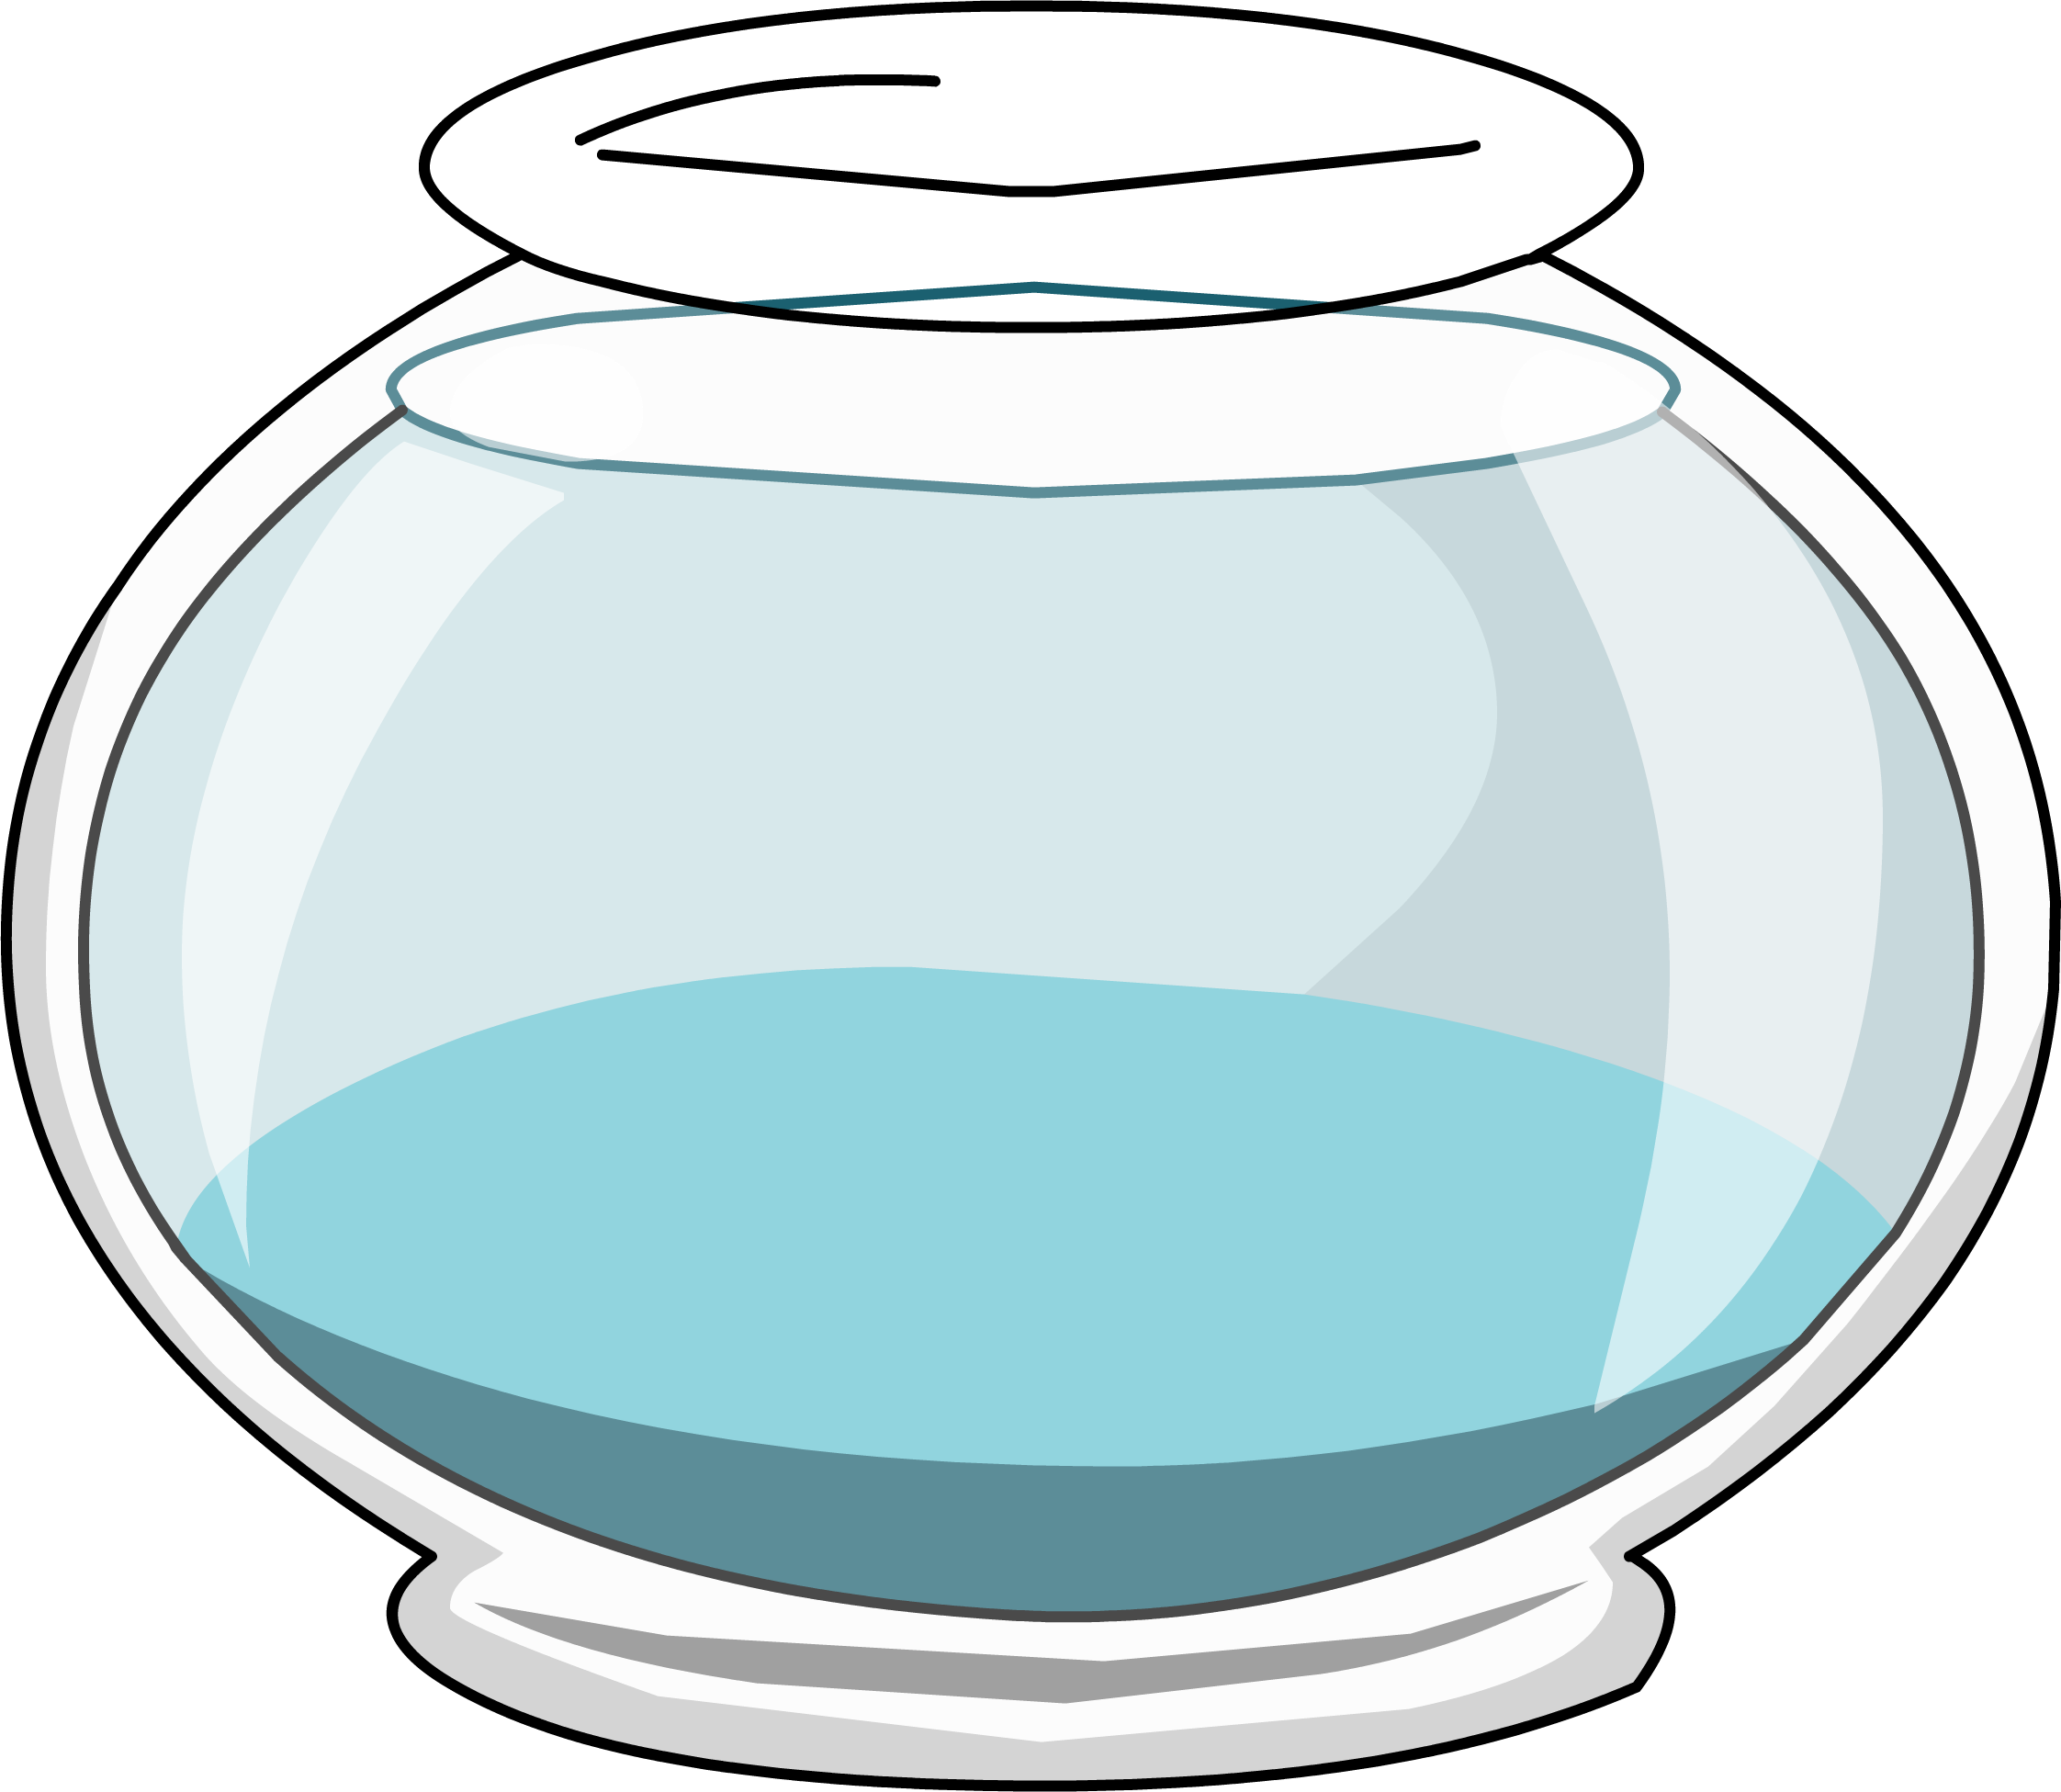 fishbowl clipart background